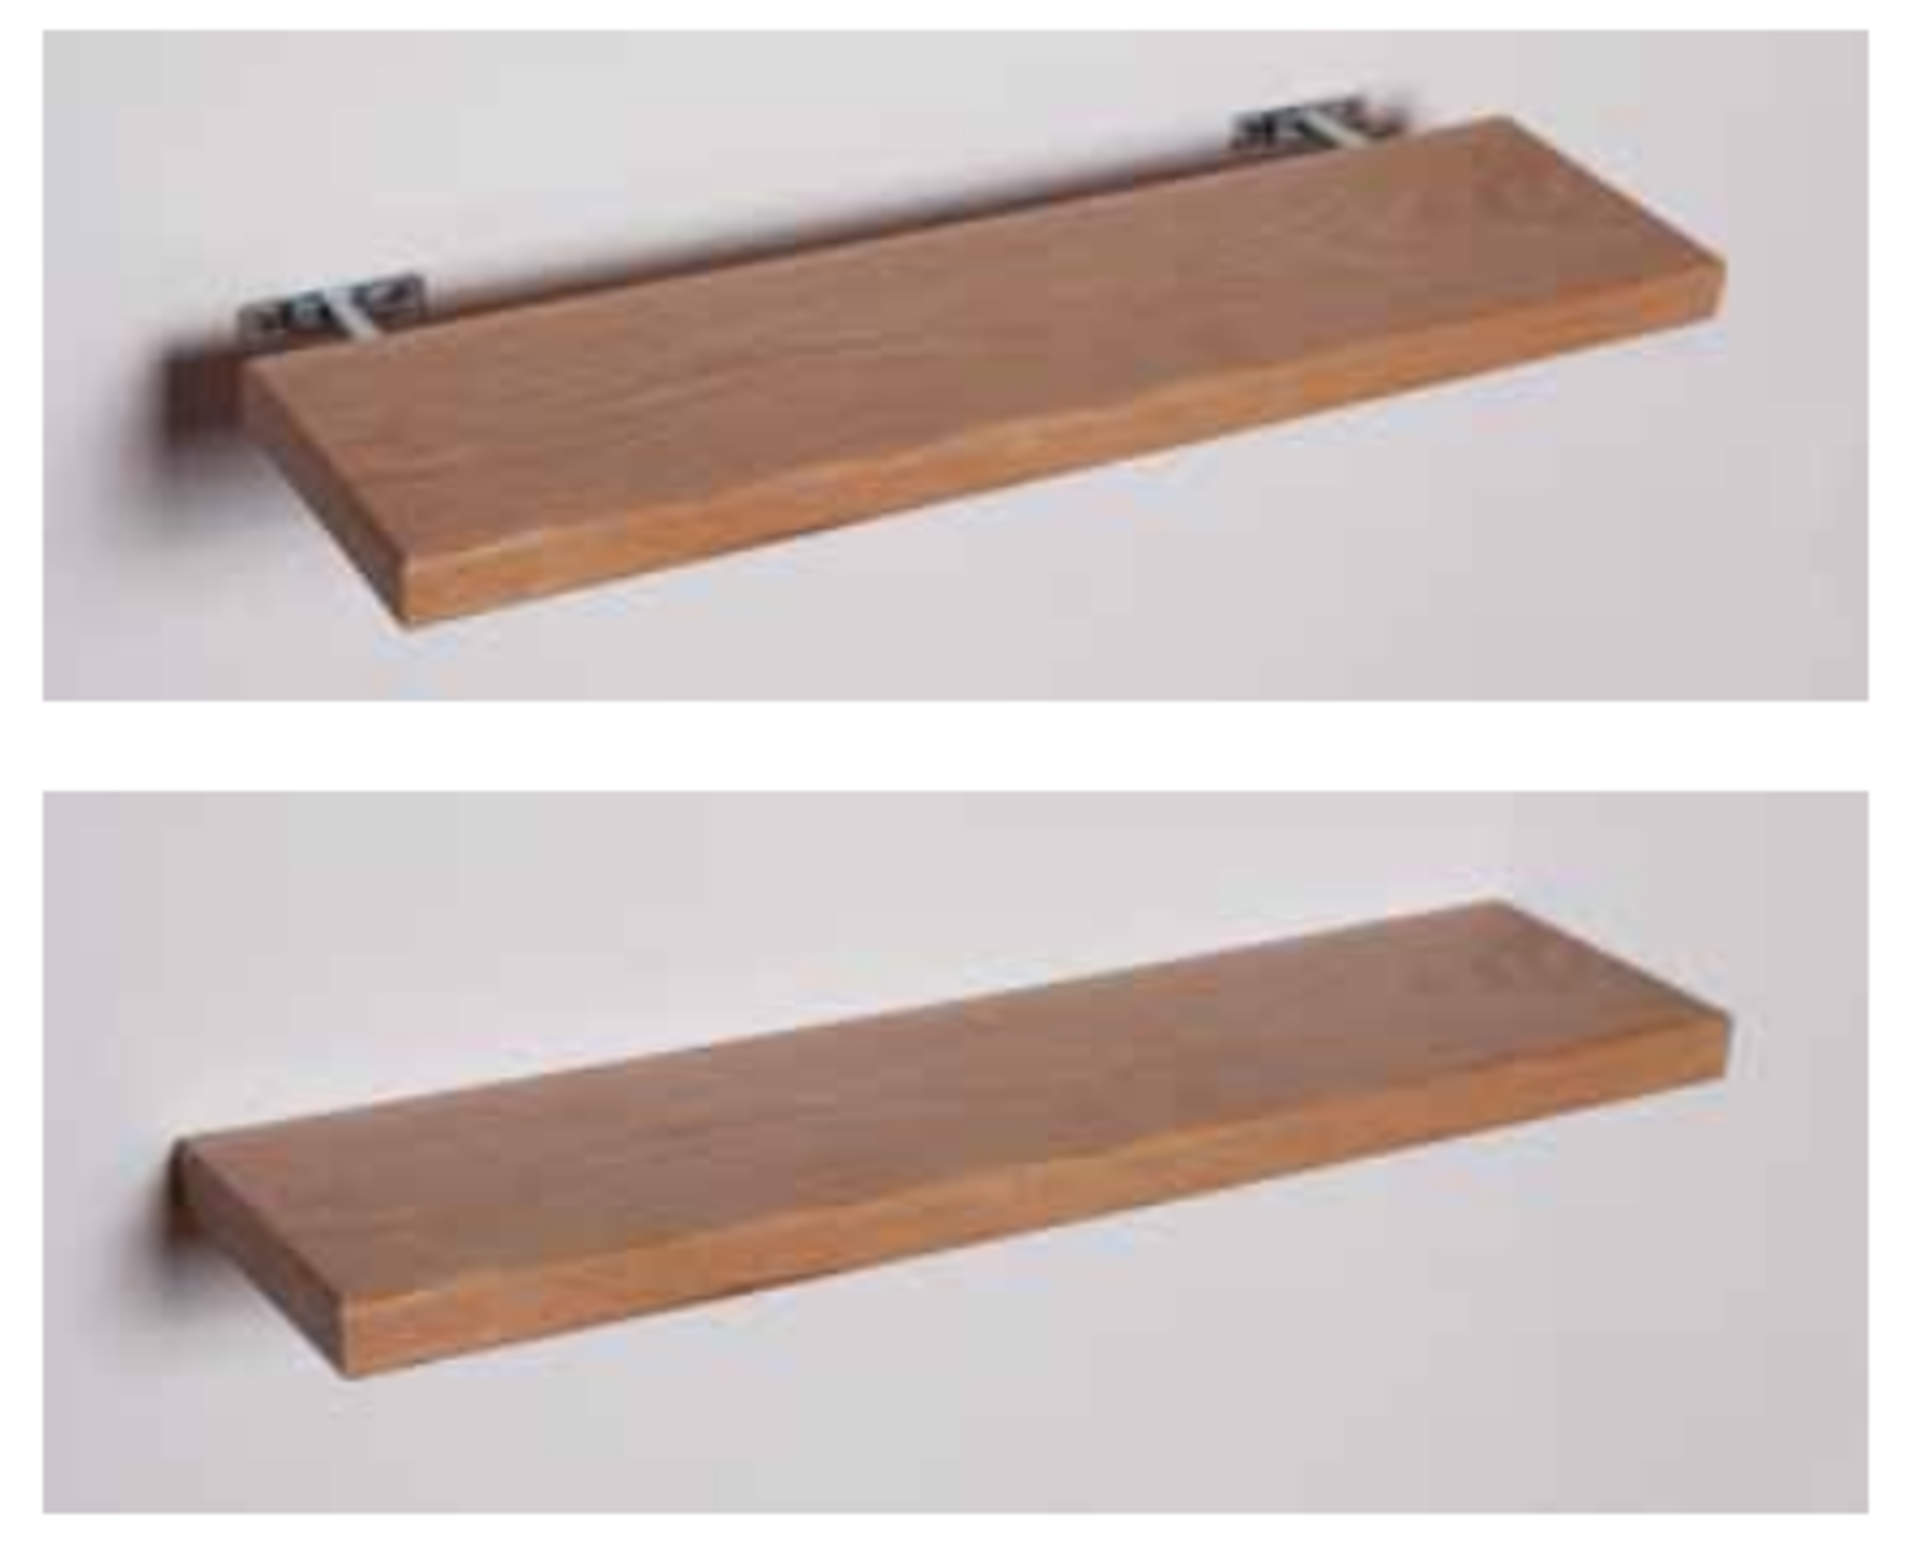 1 x Stonearth Bathroom Storage Shelf With Concealed Brackets - American Solid Walnut - Size: 900mm - Image 2 of 16